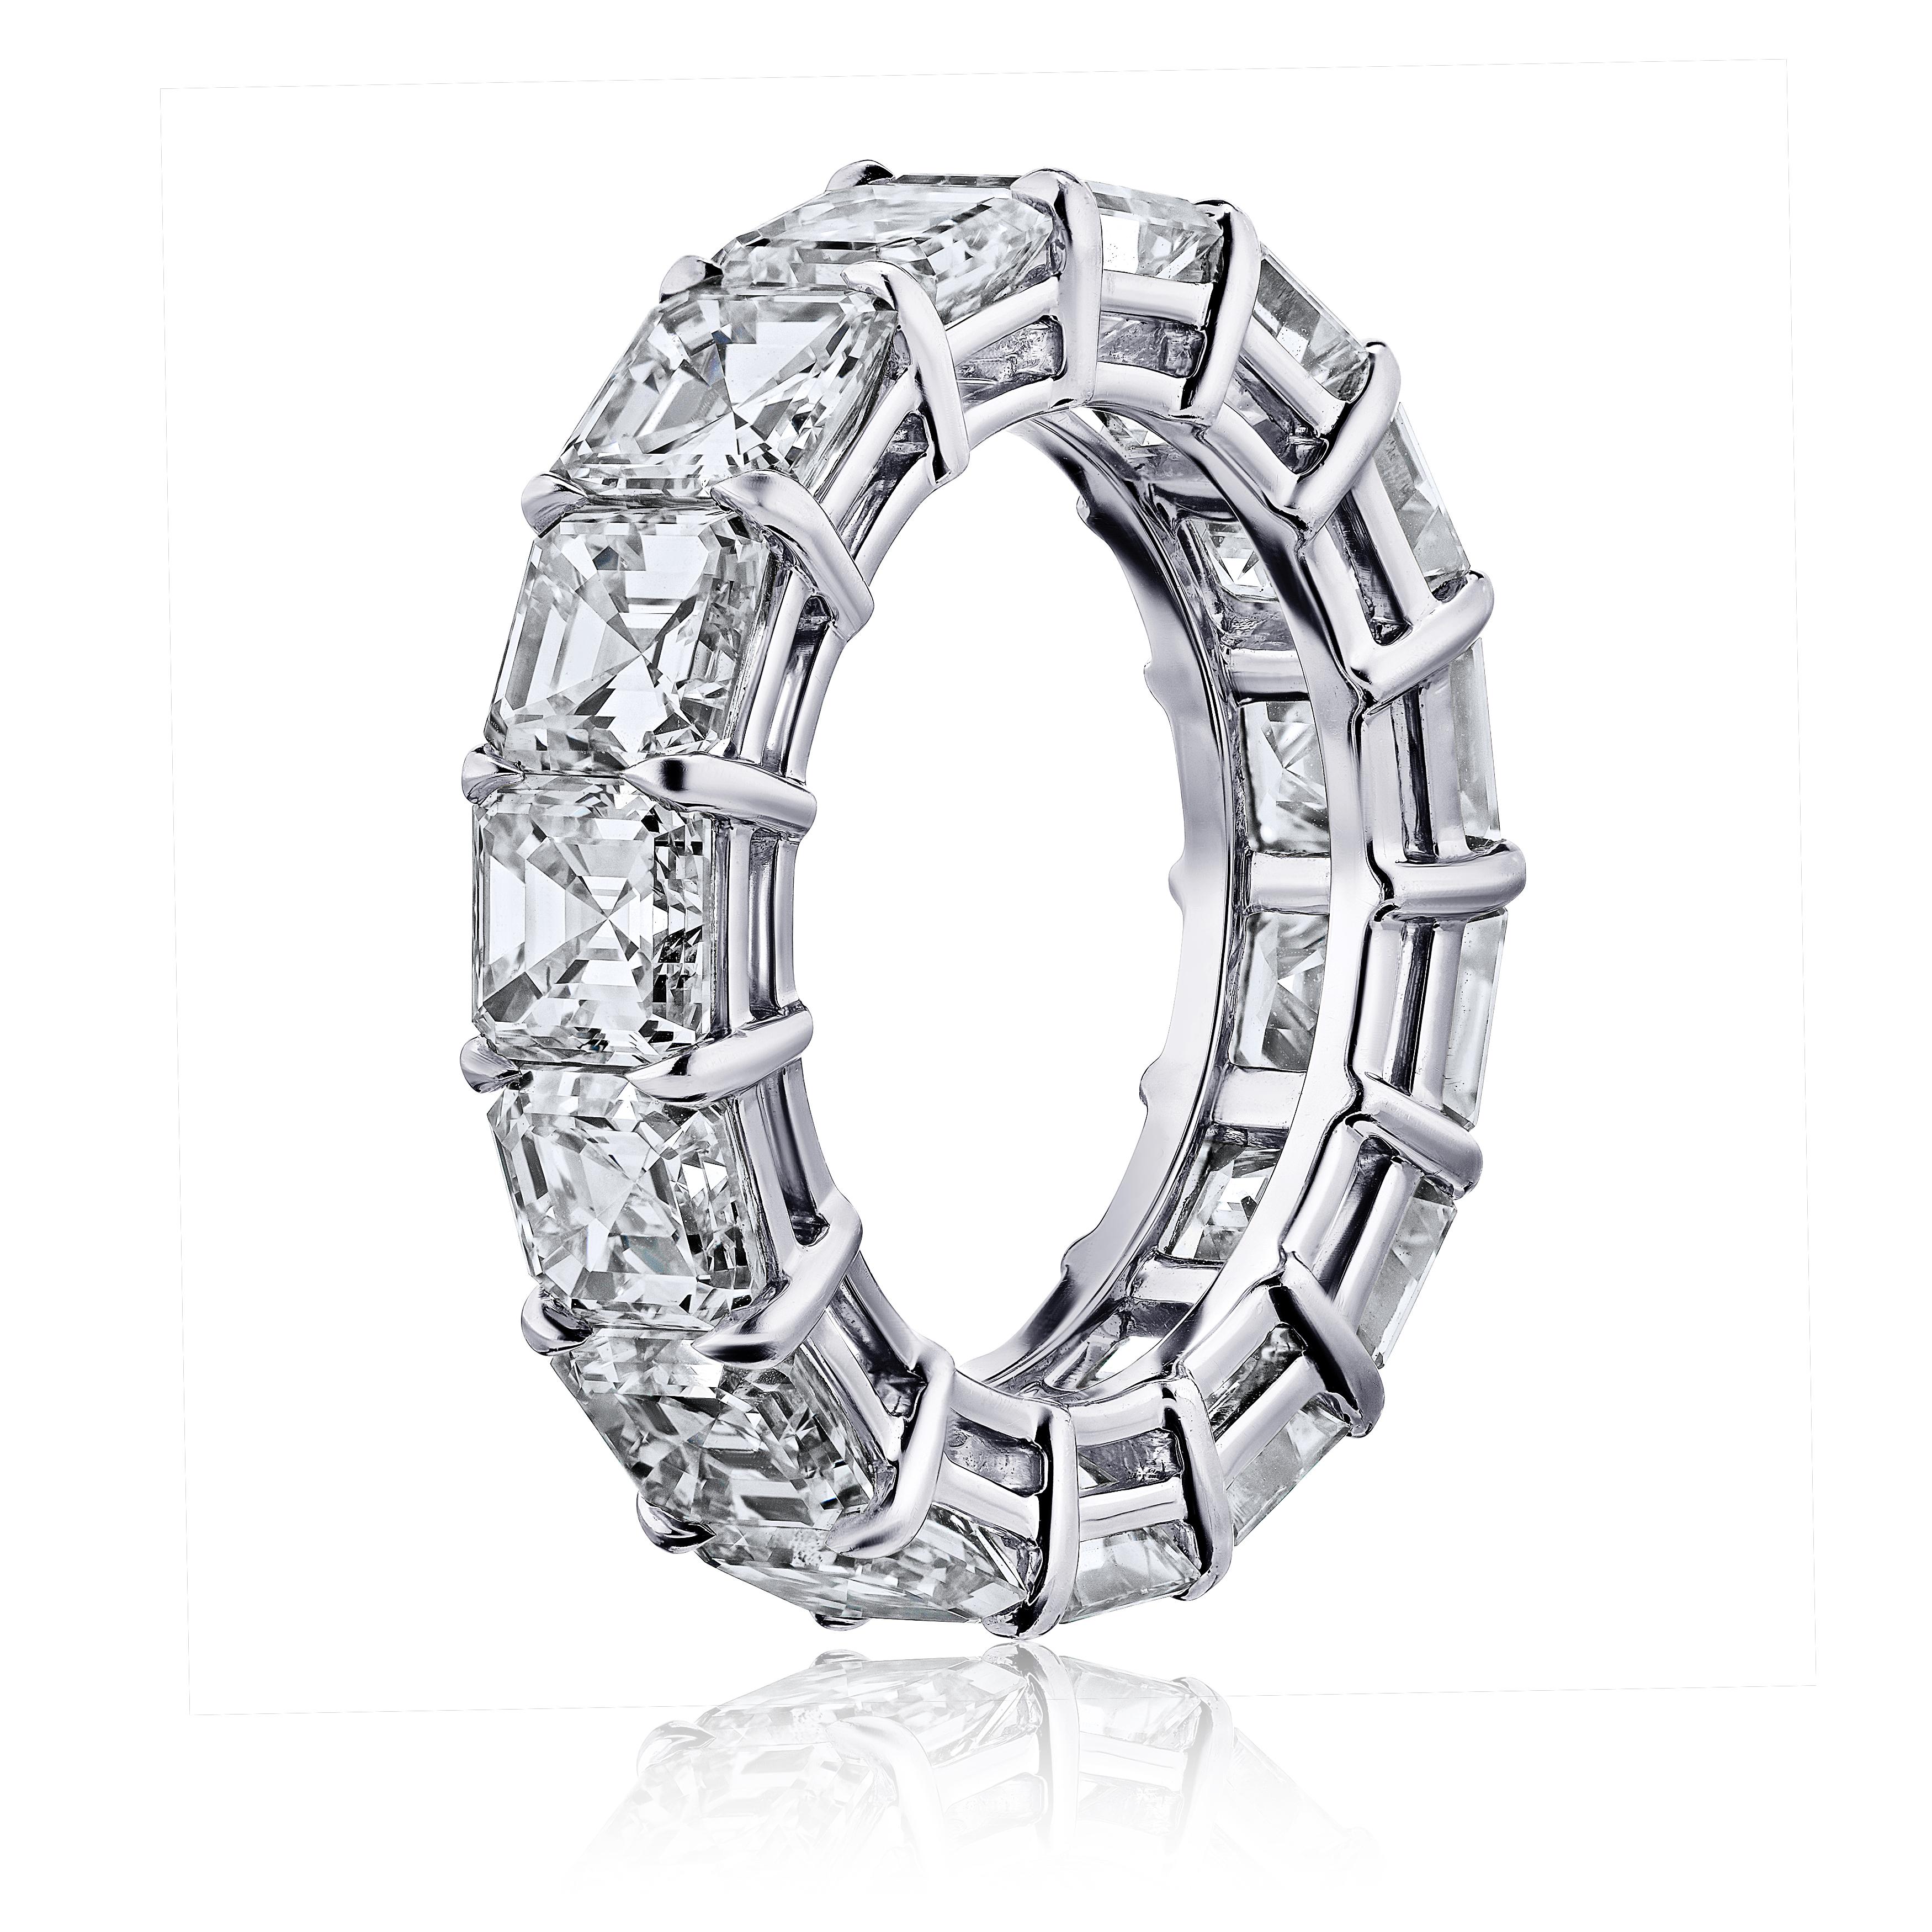 Asher Cut diamond ring platinum eternity band shared prong style with a gallery.
15 perfectly matched diamonds weighing a minimum of 6.30 cts. G.I.A certificates for each diamond . Ranging from D-F in color . VVS1-VS2 in clarity .Finger size 5.